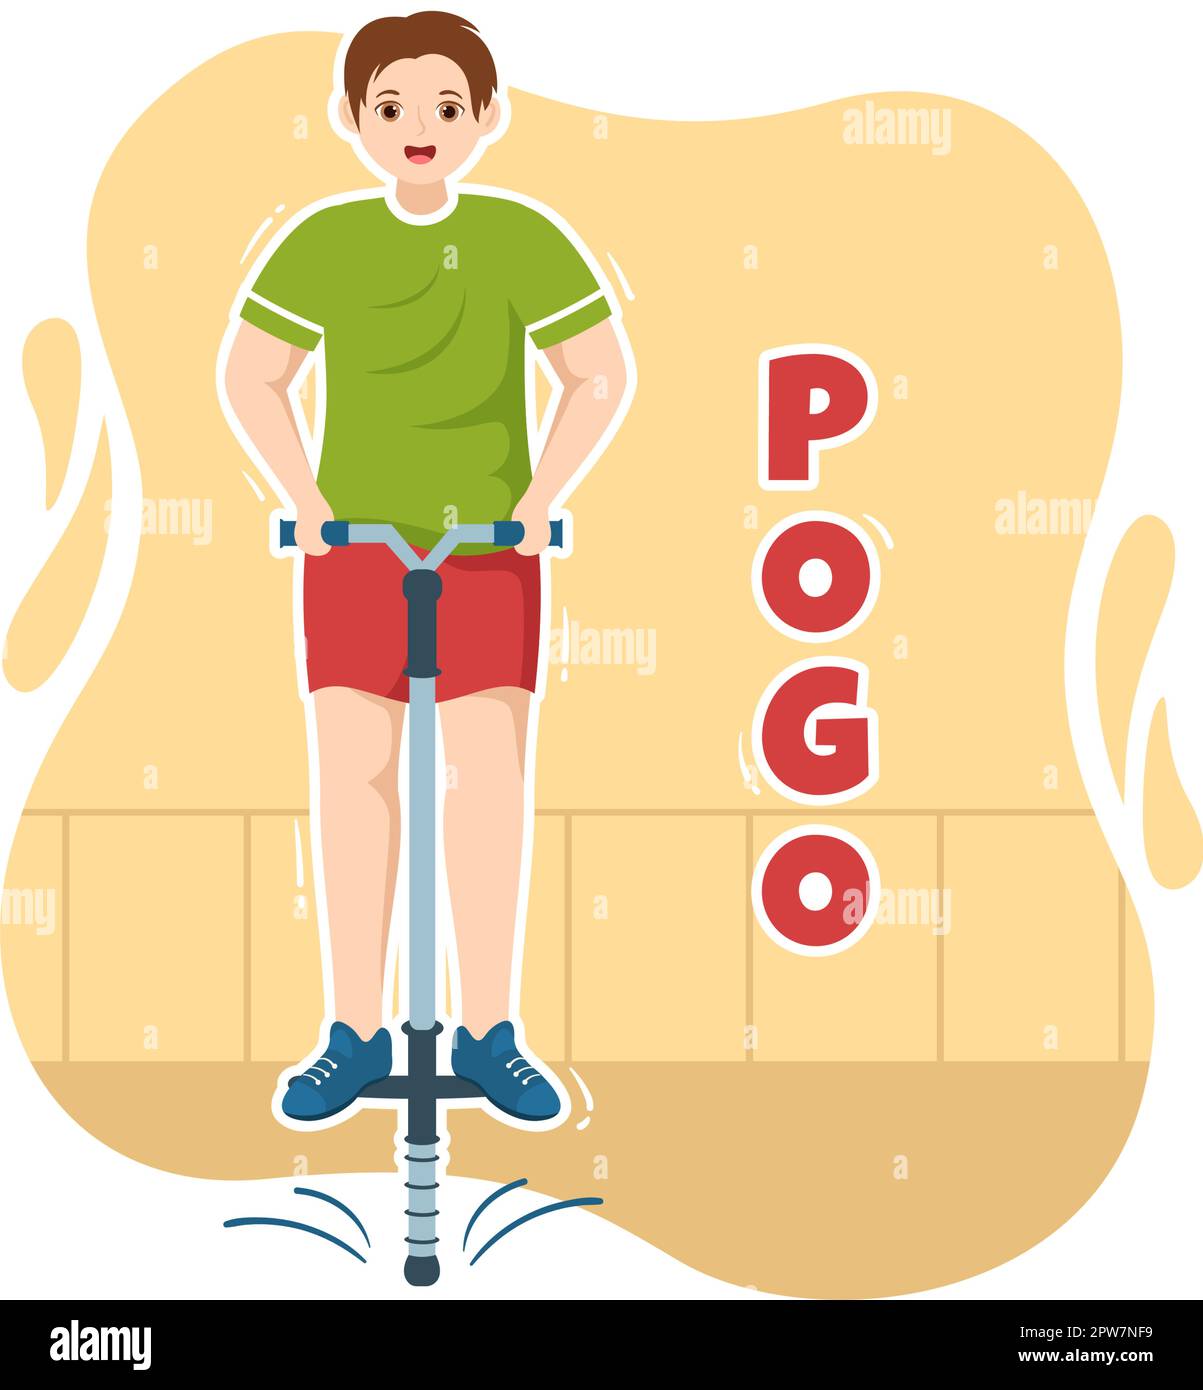 People Playing With Sport Jump Pogo Stick Illustration for Web Banner or Landing Page in Outdoor Fun Toy Flat Cartoon Hand Drawn Templates Stock Vector